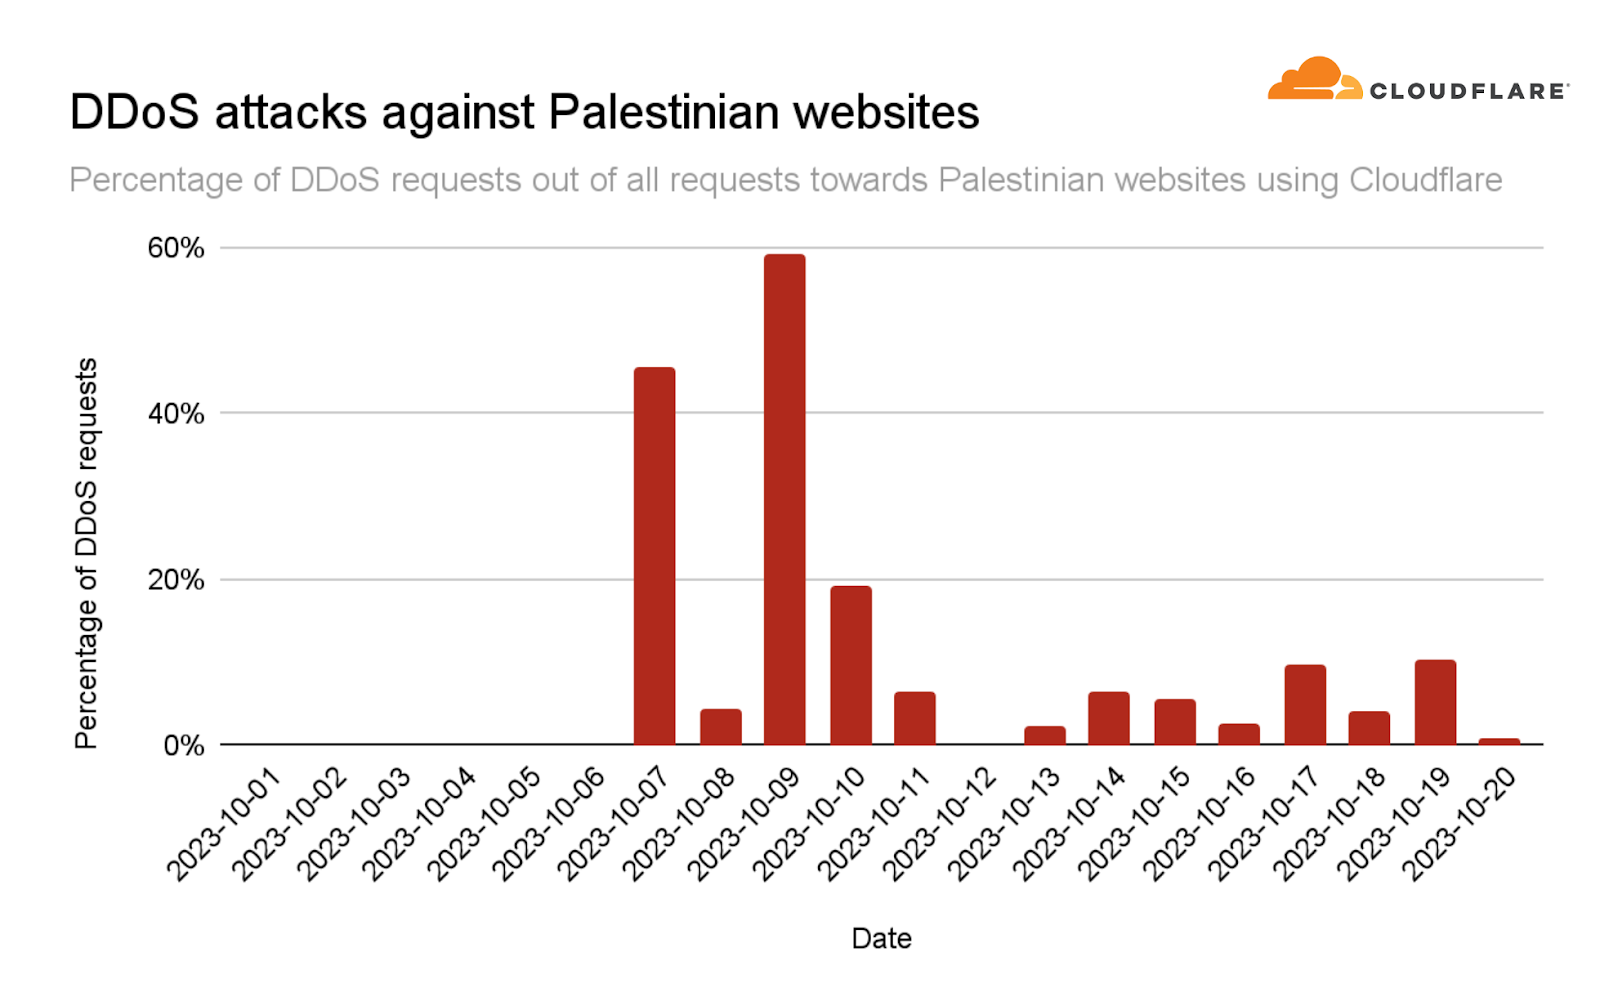 Percentage of DDoS requests out of all requests towards Palestinian websites using Cloudflare